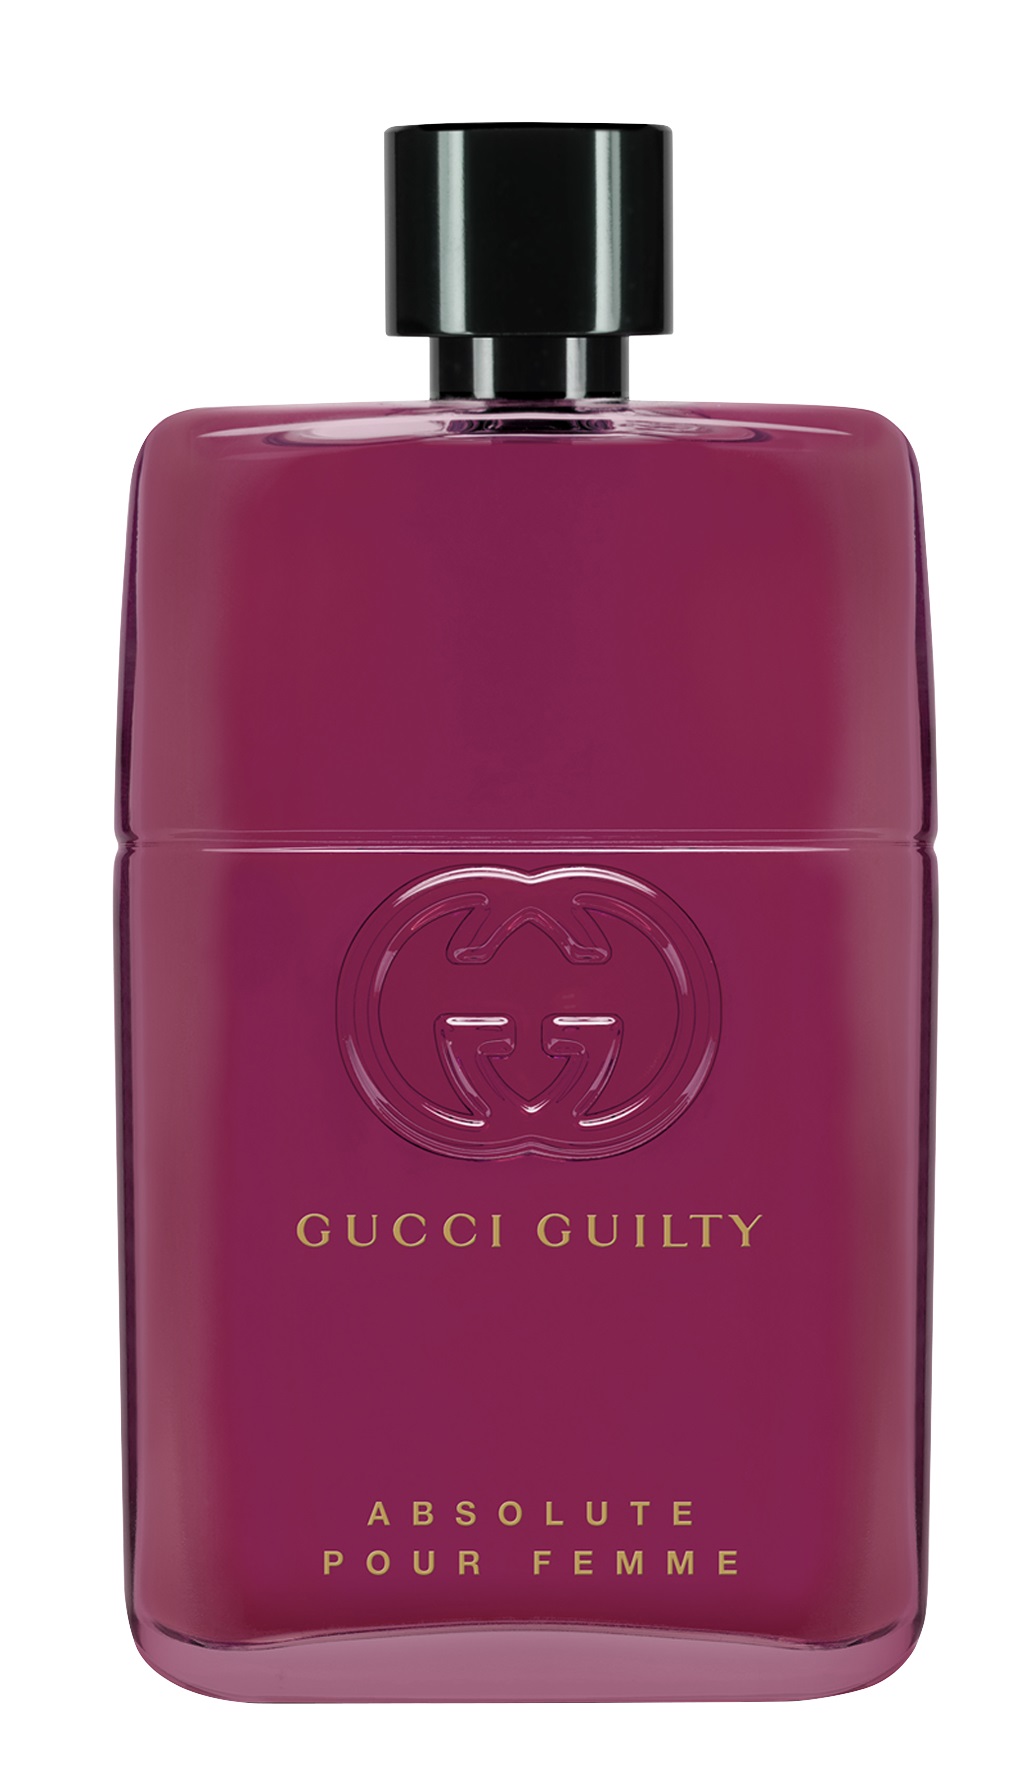 gucci homme pour femme meaning